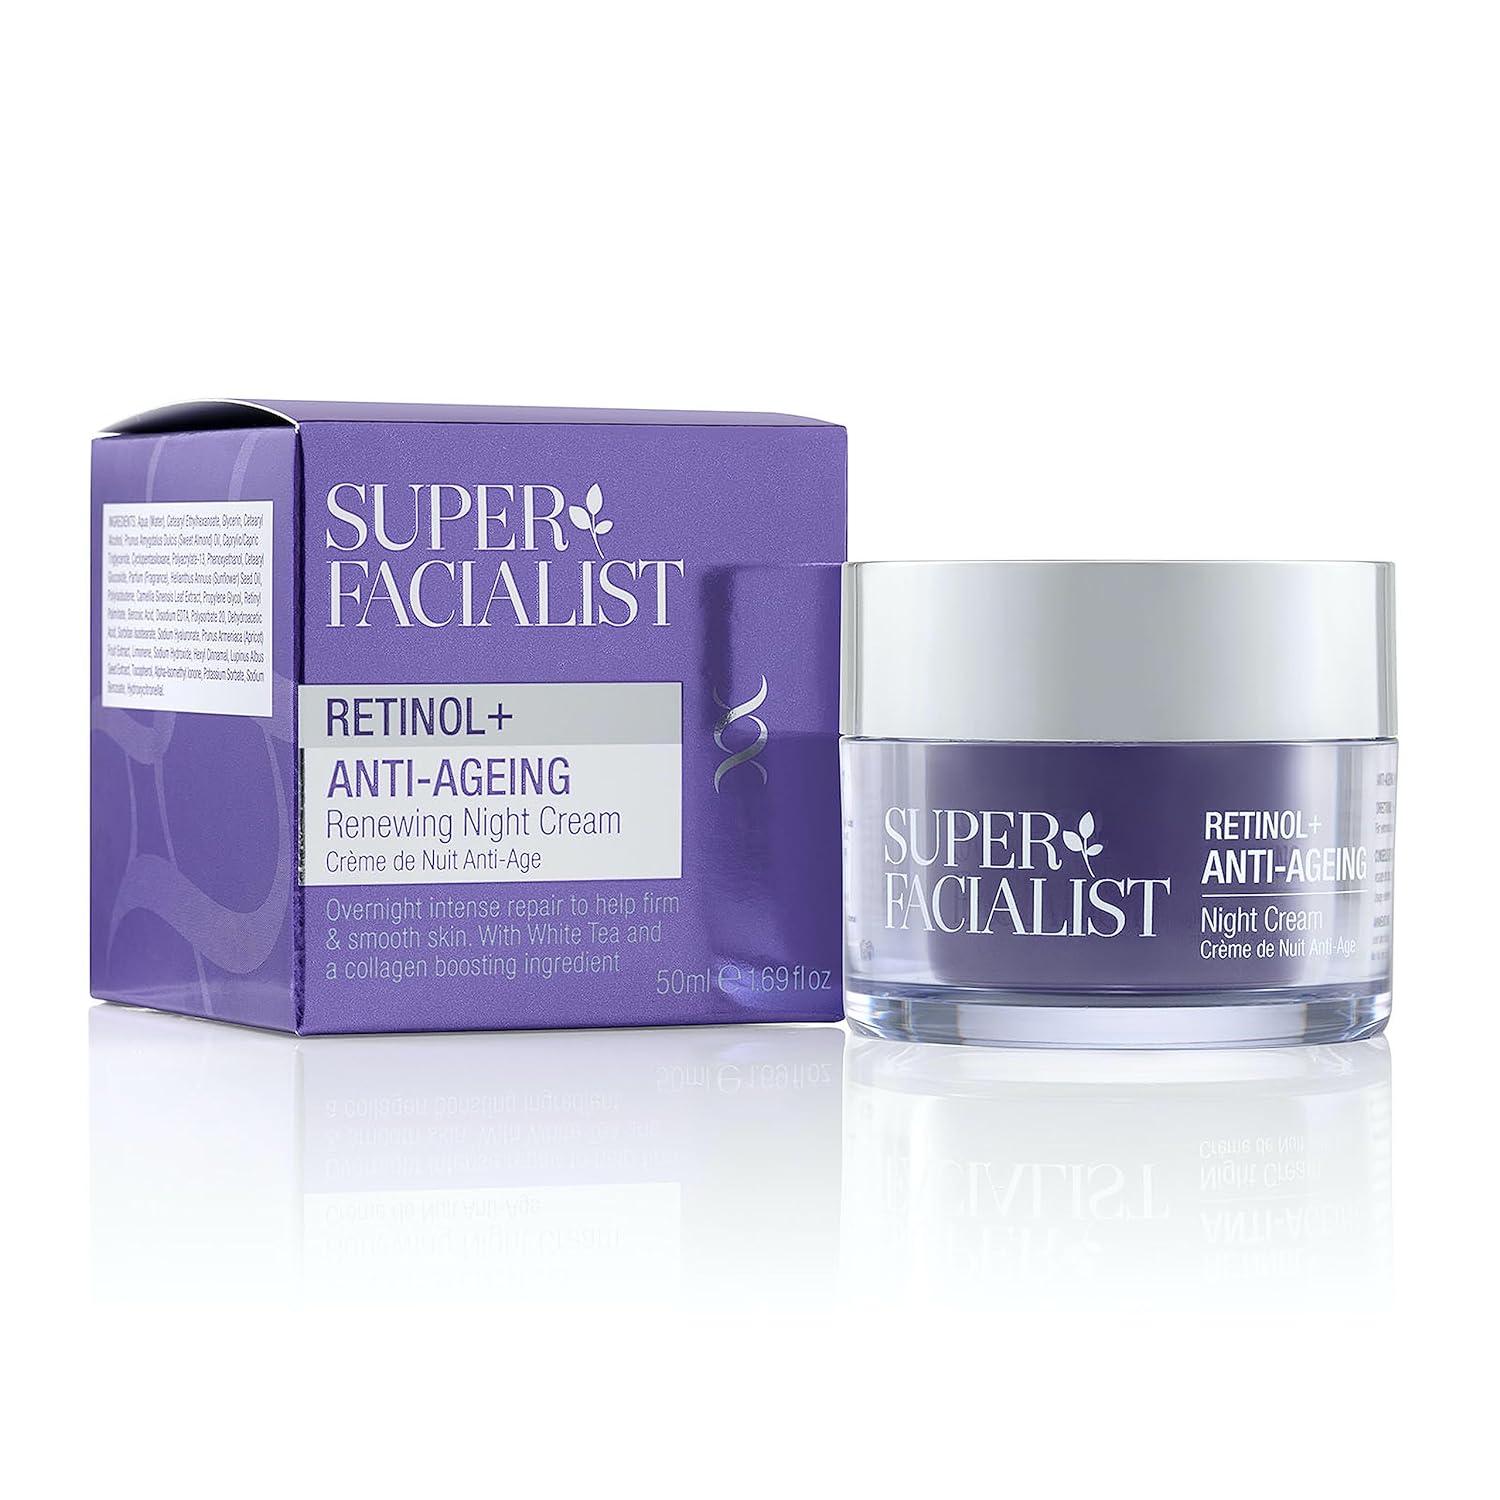 Super Facialist Retinol+ Anti Ageing Renewing Night Cream, Reduce Wrinkles and Fine Lines Overnight, for Normal Skin, 50